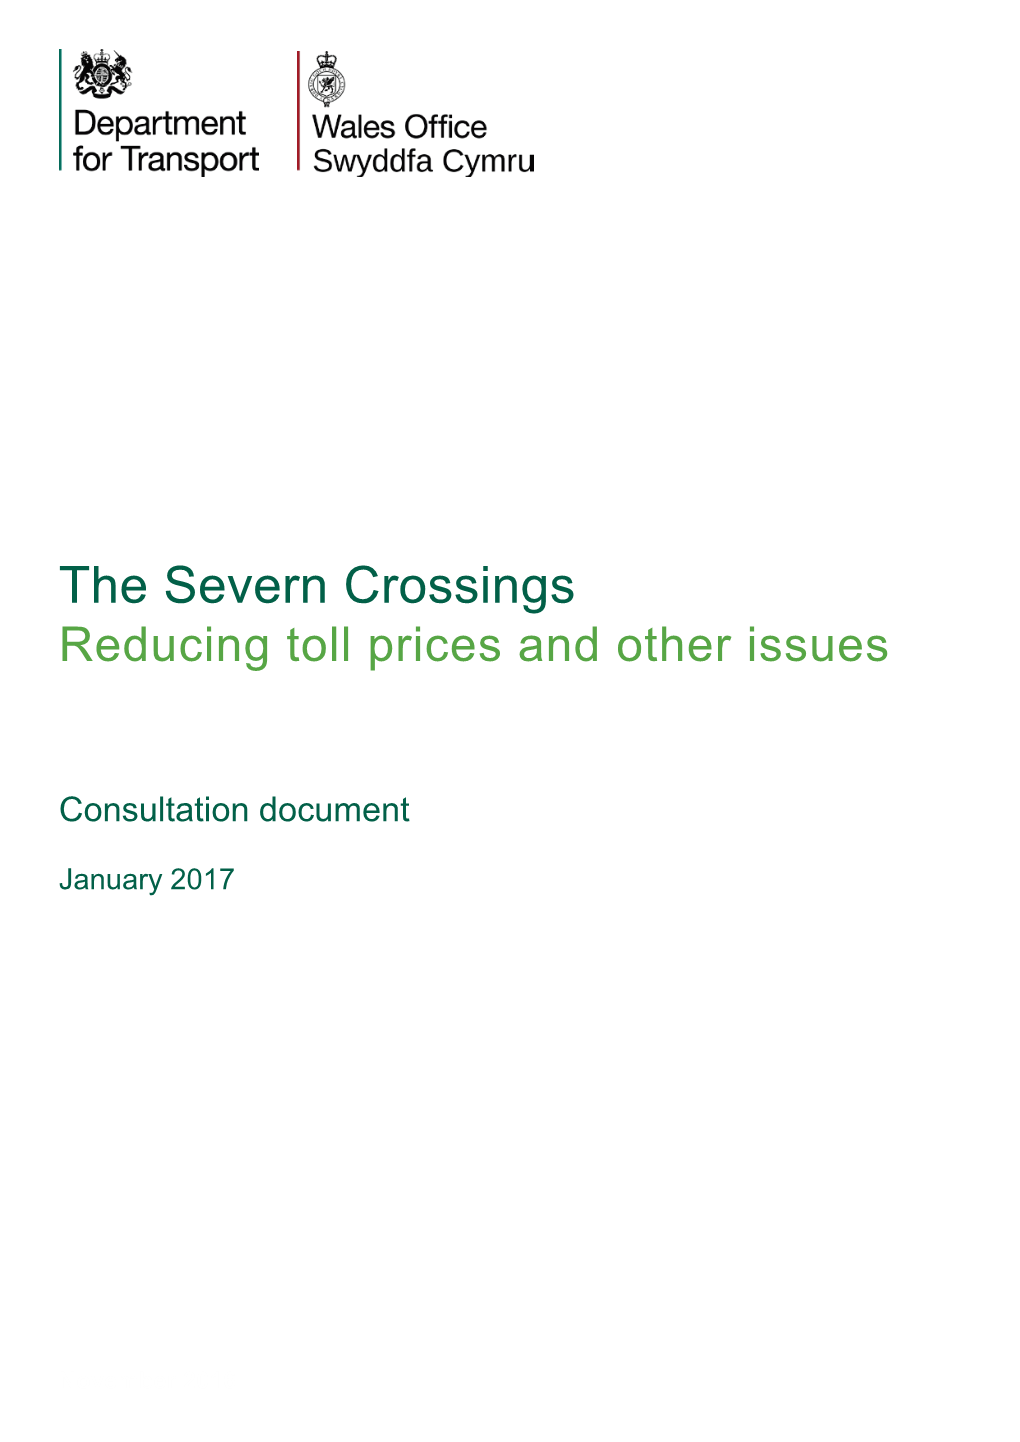 The Severn Crossings: Reducing Toll Prices and Other Issues